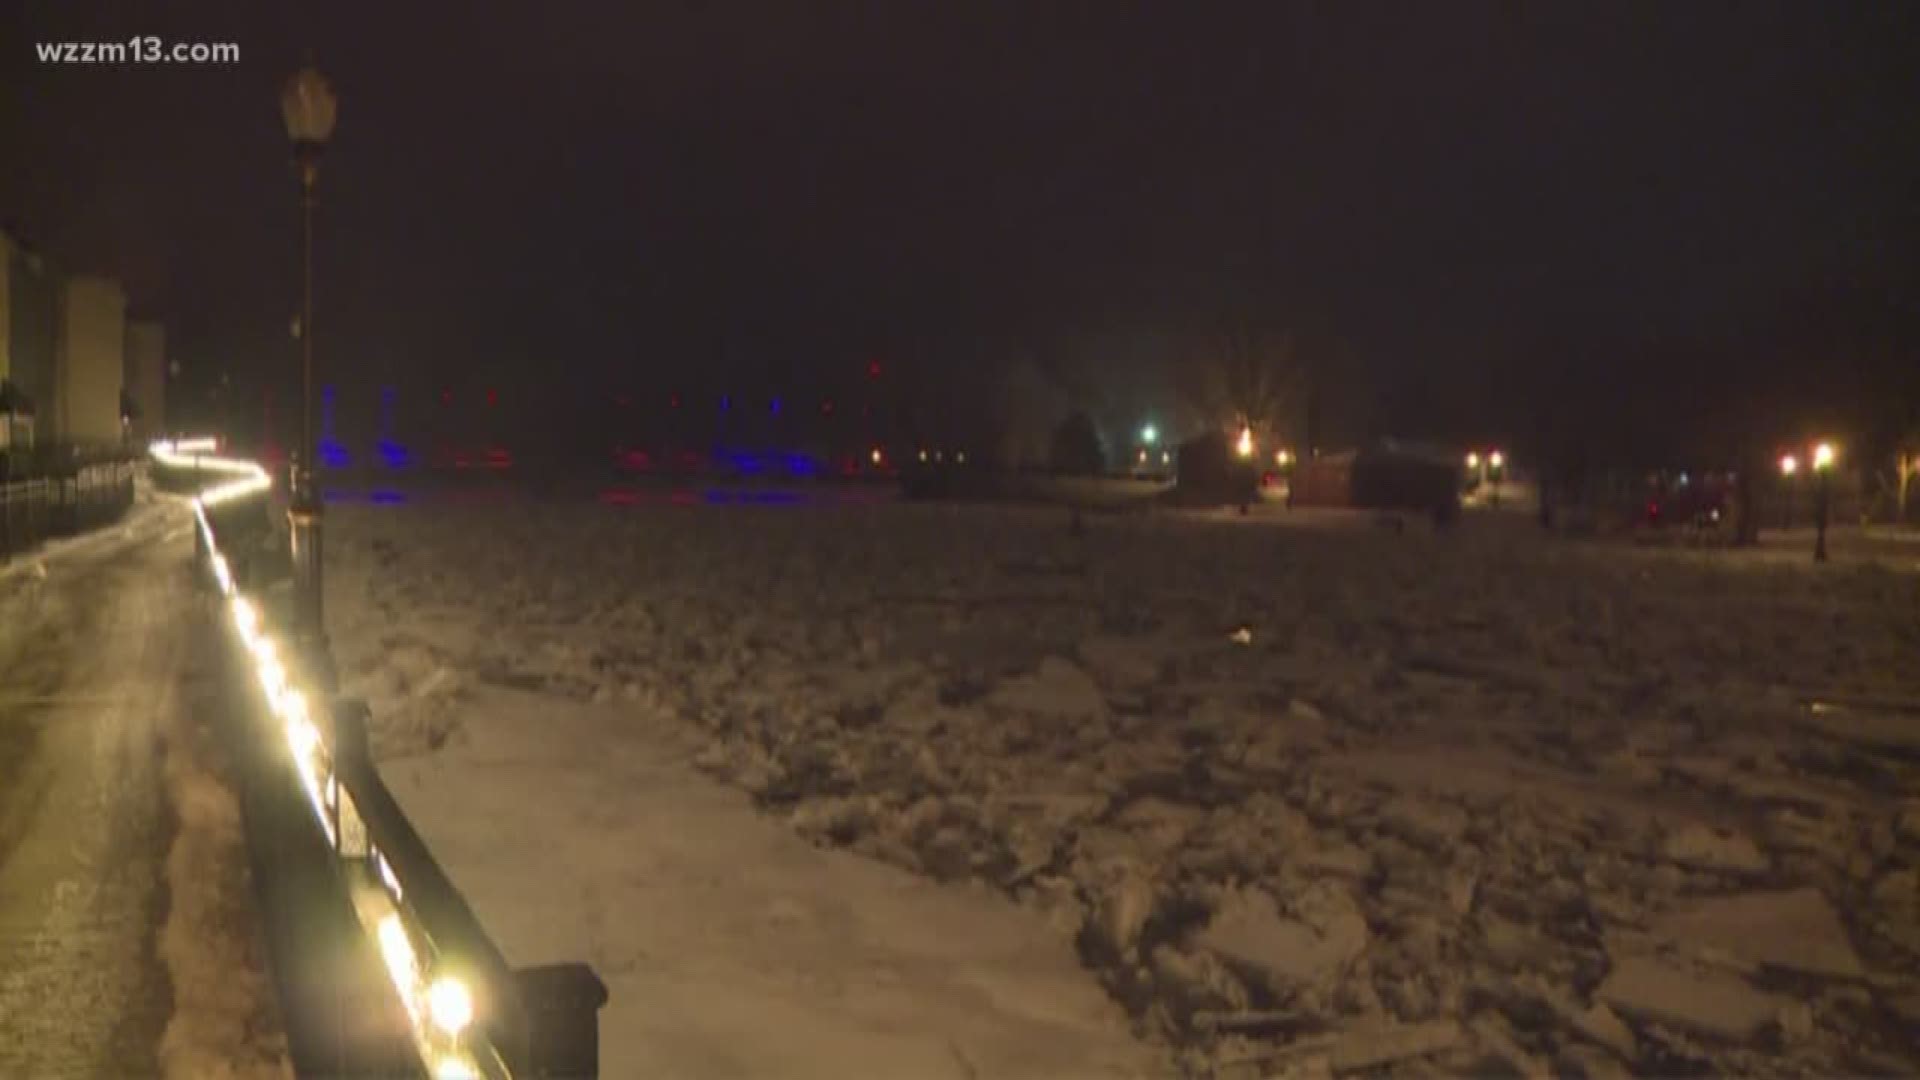 An ice jam has lead to flooding in the City of Portland and has prompted evacuations.